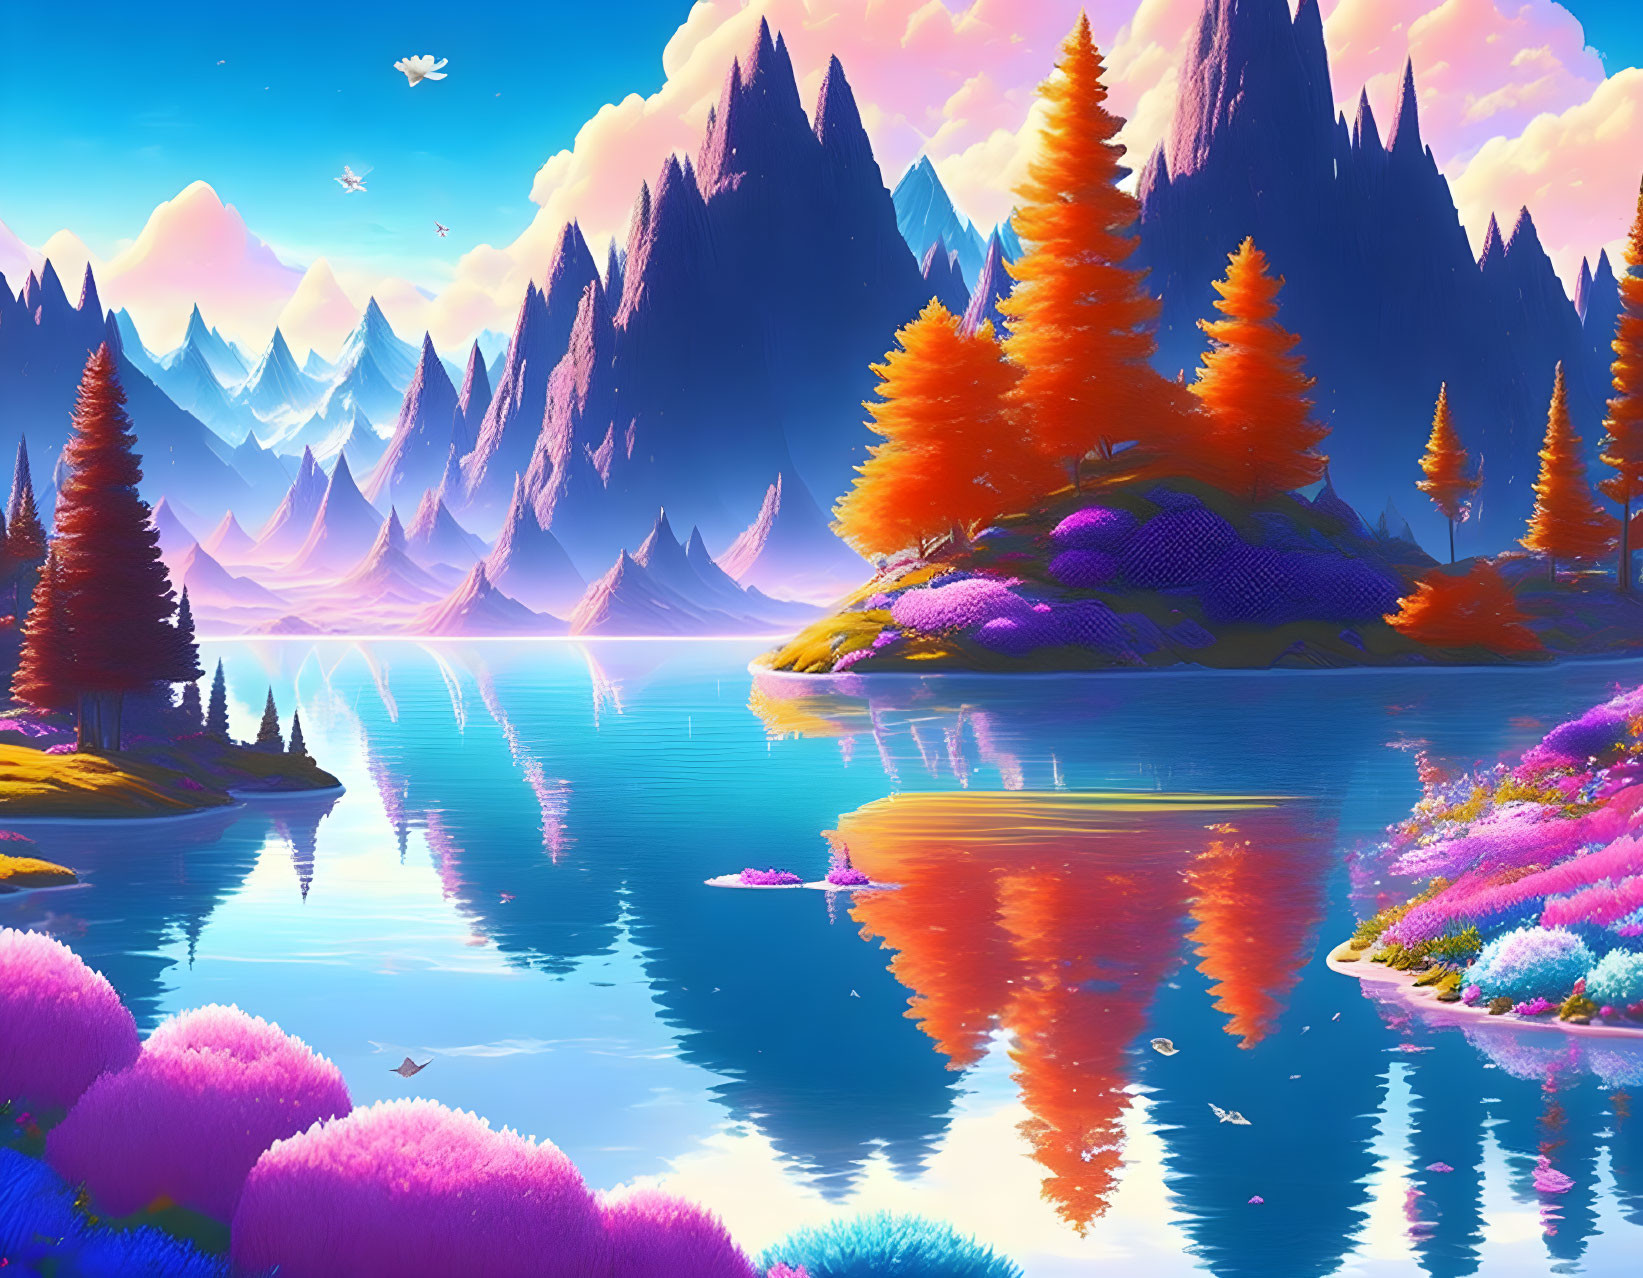 Colorful Trees, Reflective Lake, Mountains, Clear Sky: Vibrant Fantasy Landscape